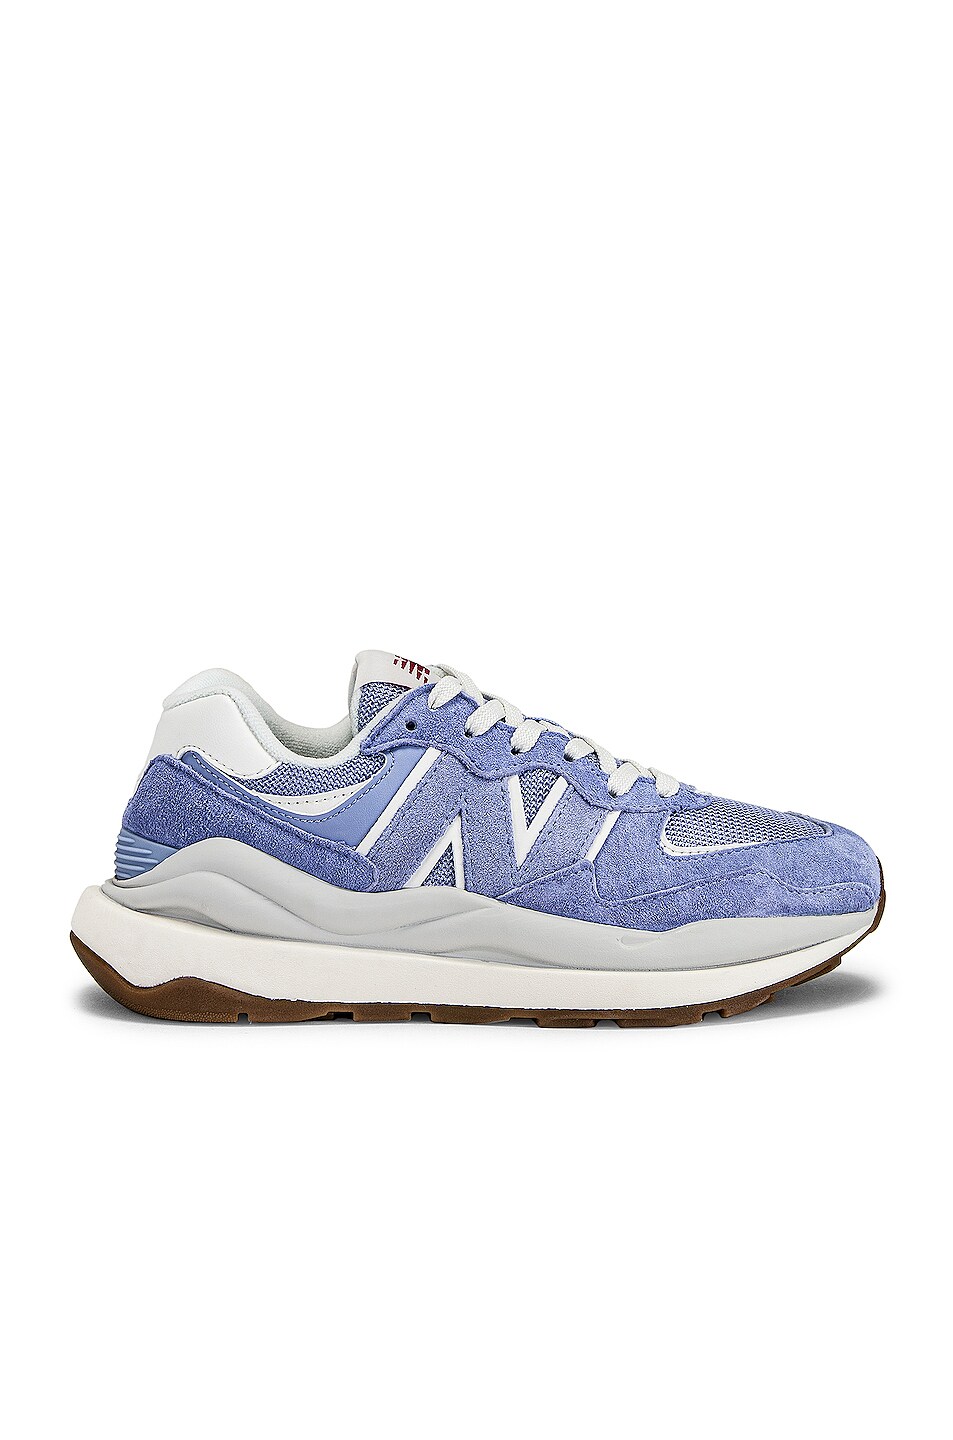 Image 1 of New Balance 57/40 Sneakers in Daydream & Sea Salt